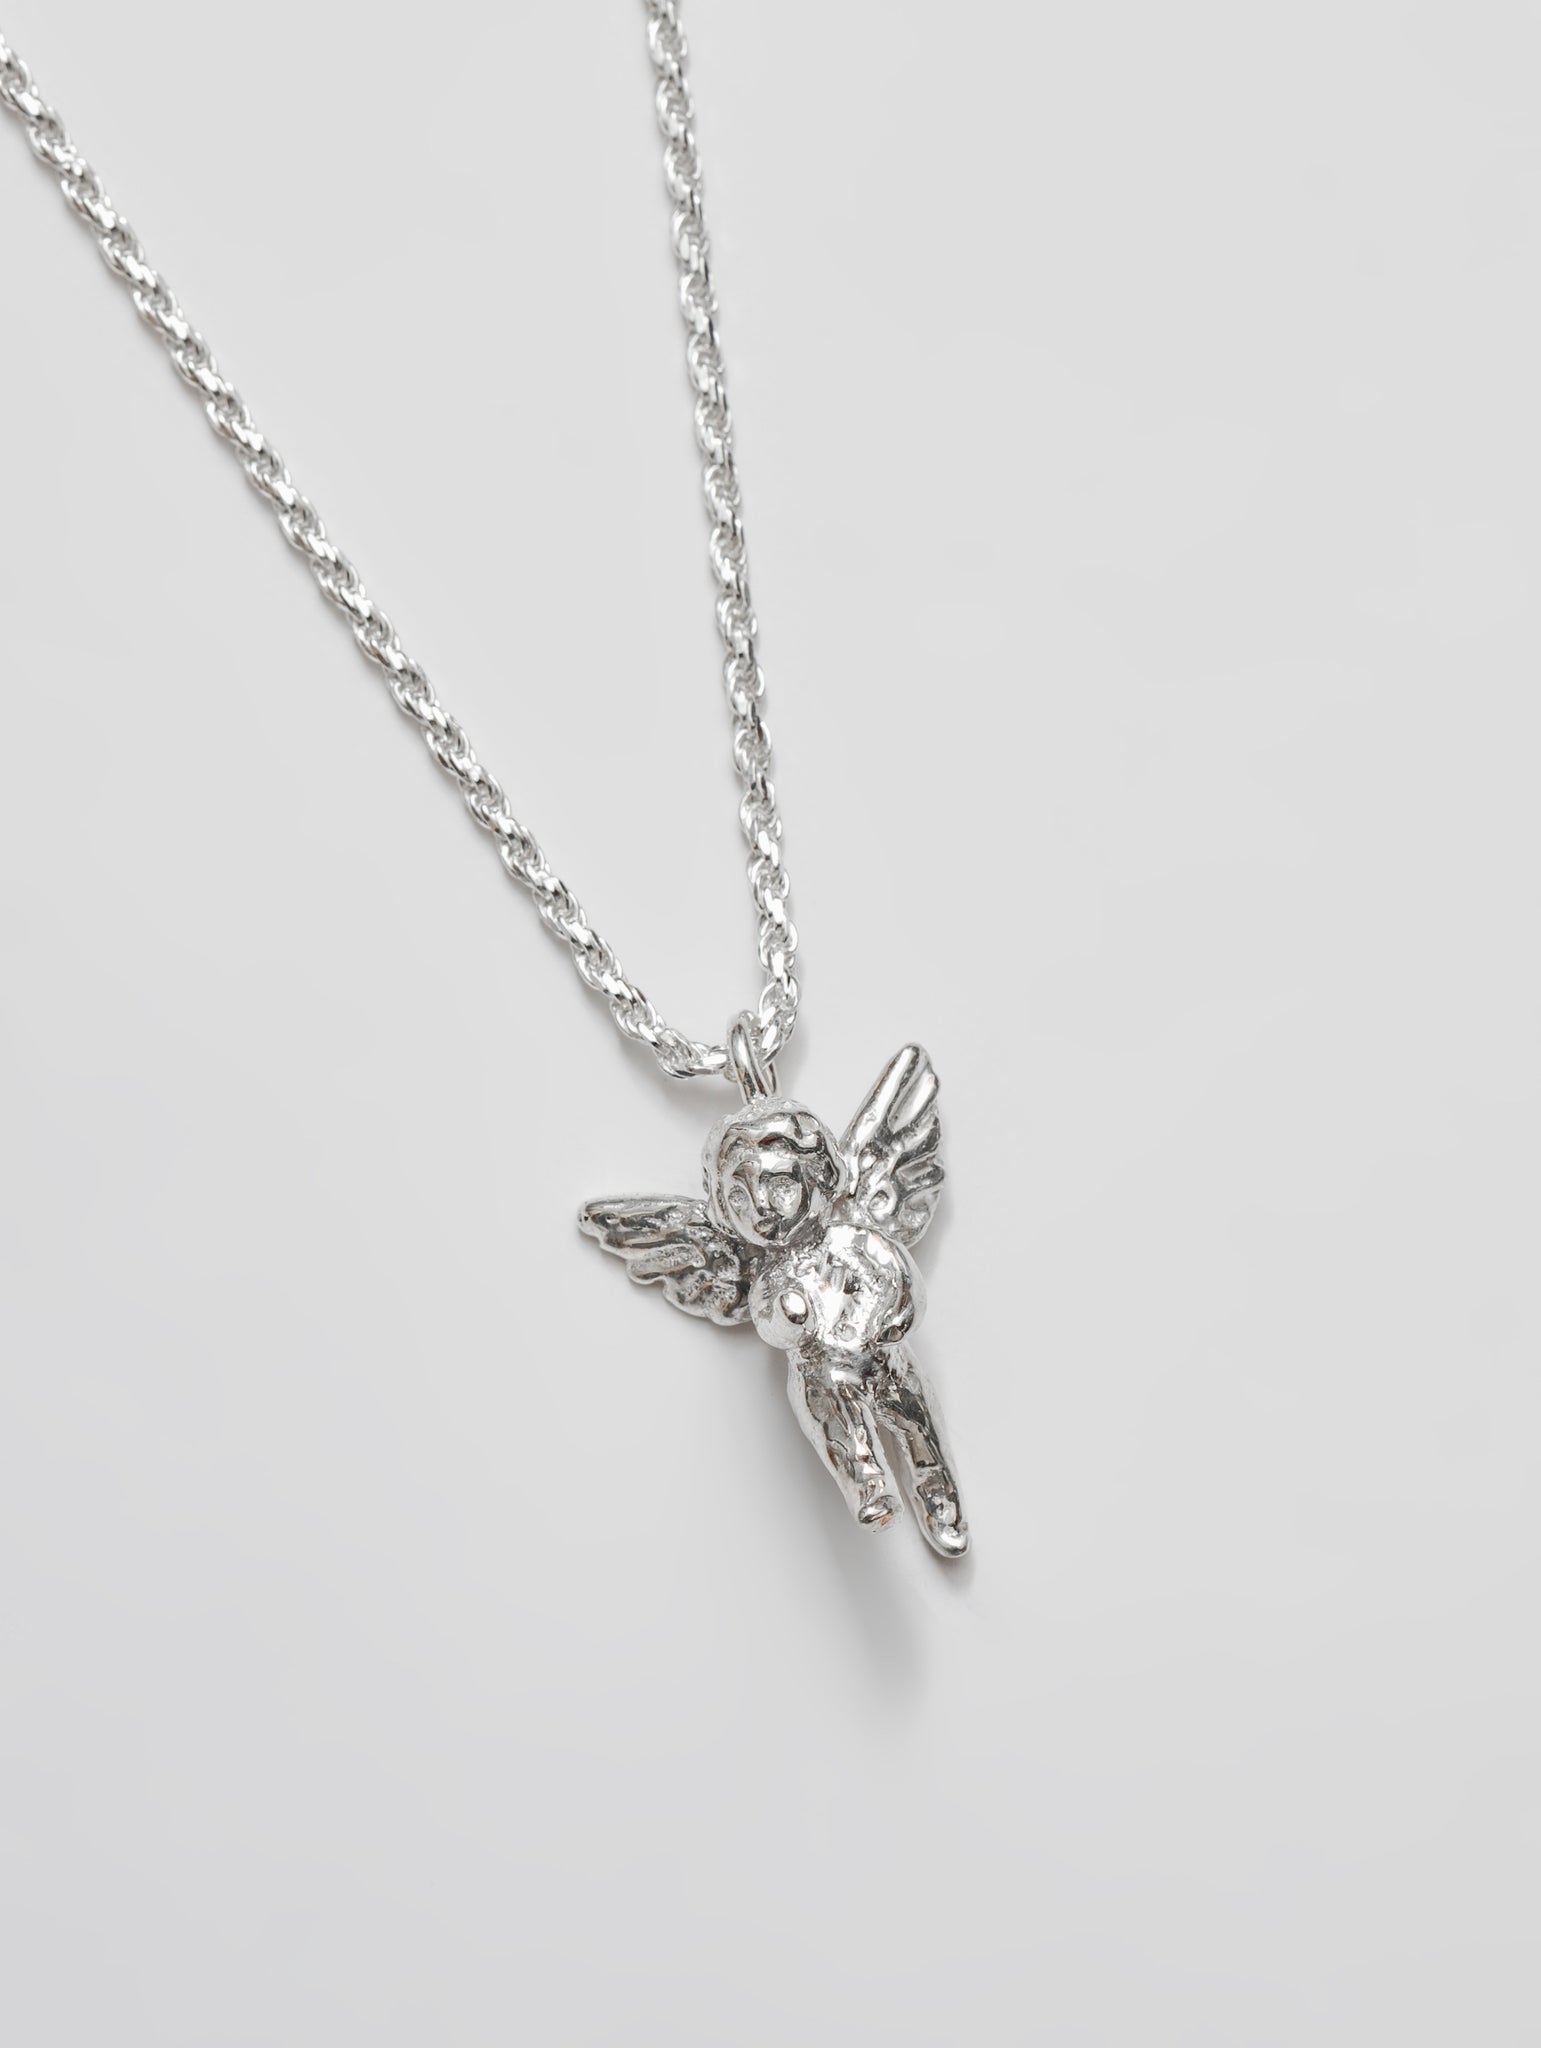 Wolf Circus Cherub Angel Charm Pendant Necklace in Sterling Silver-Necklaces-wolfcircus.com